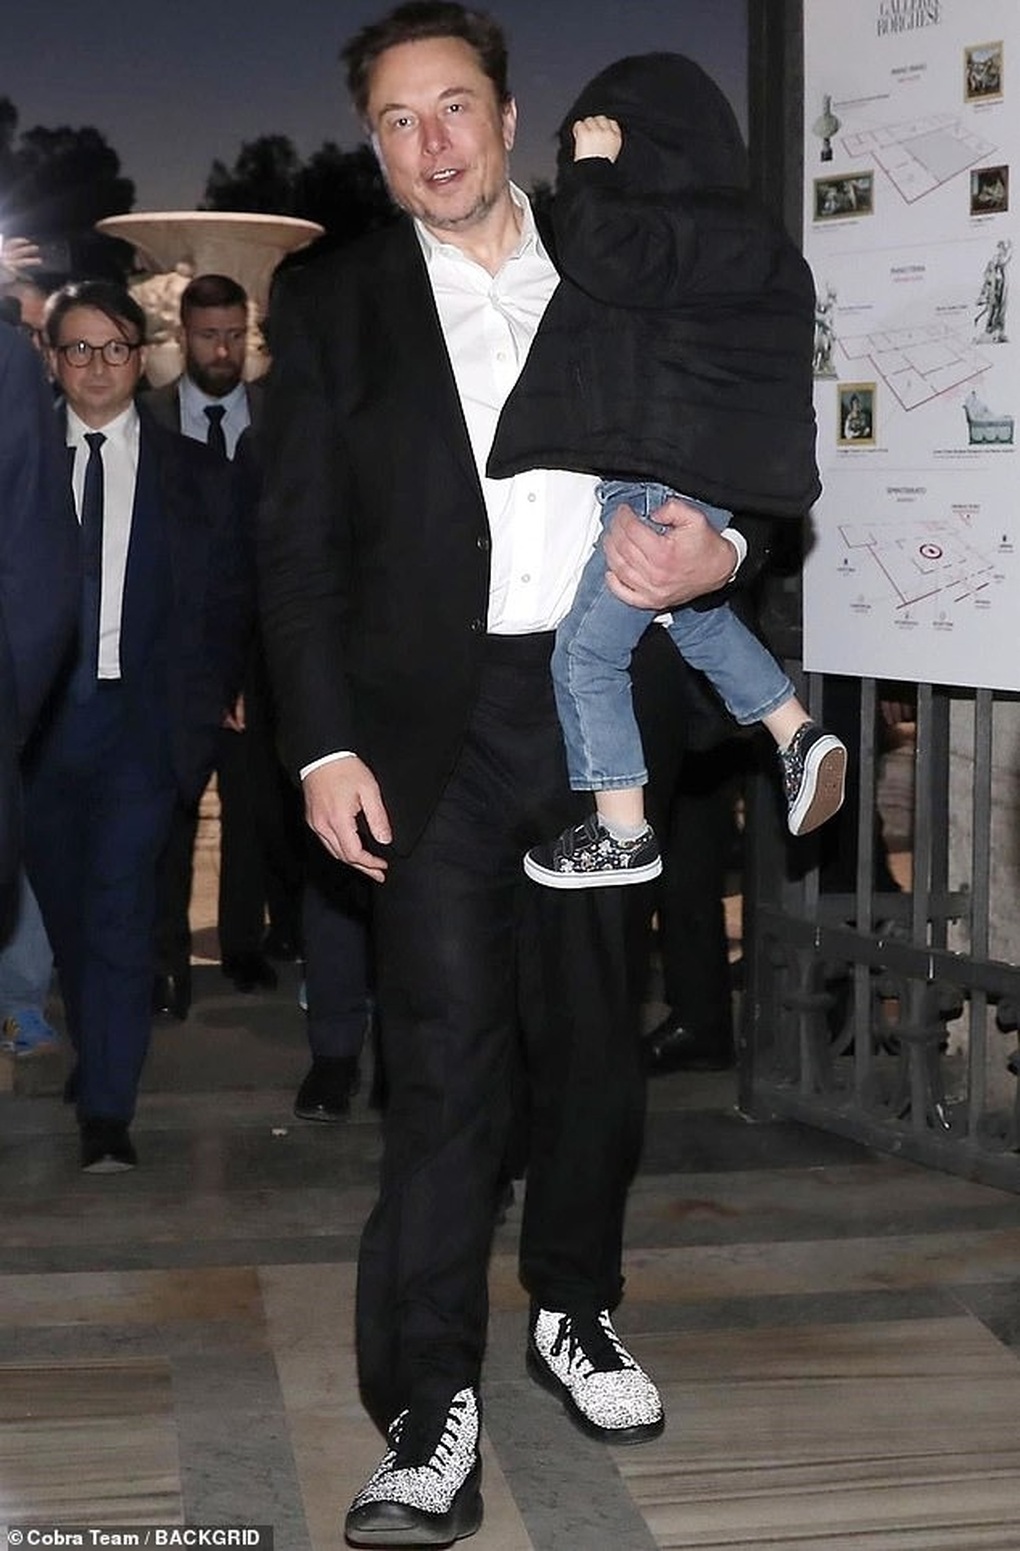 The image of billionaire Elon Musk carrying his 3-year-old son to see an exhibition attracts attention - 4